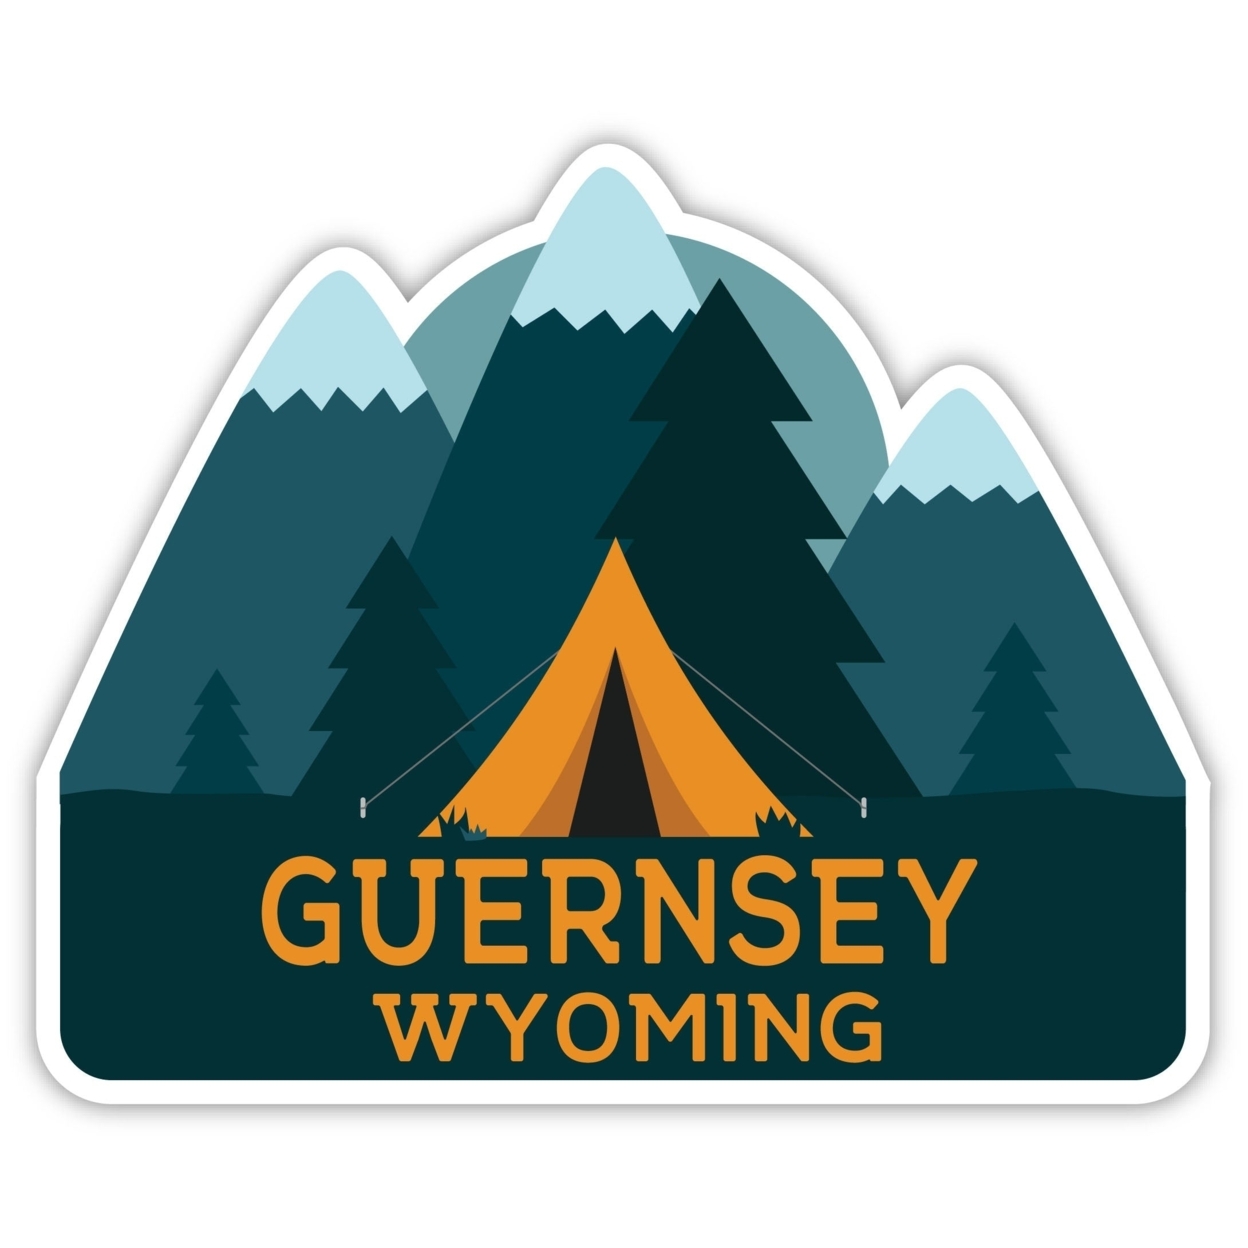 Guernsey Wyoming Souvenir Decorative Stickers (Choose Theme And Size) - 4-Pack, 4-Inch, Tent